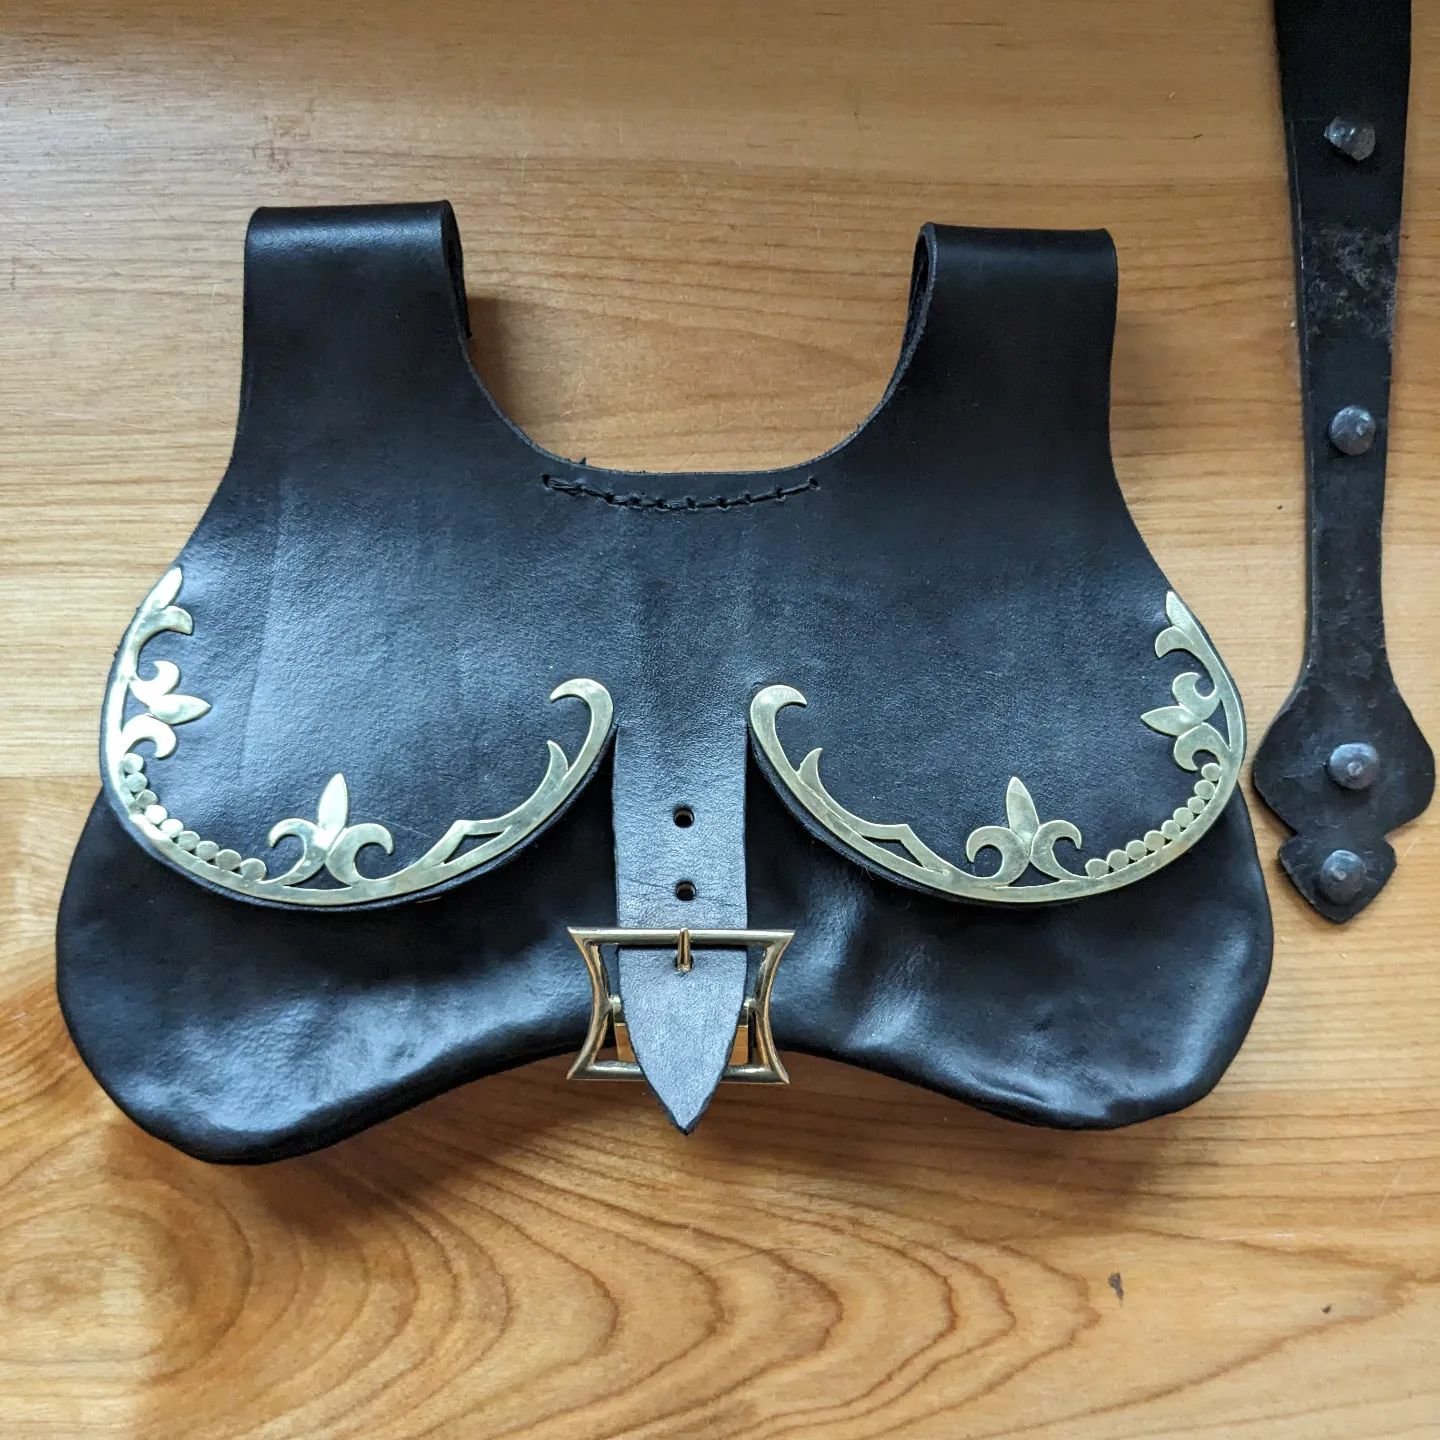 I had a crazy day finishing this fifteenth century reproduction pouch but I'm over the moon about how it turned out. Took about 12 hrs. #historicalreproduction #fifteenthcentury #reenacting #beltpouch #reproduction #leatherwork #maker